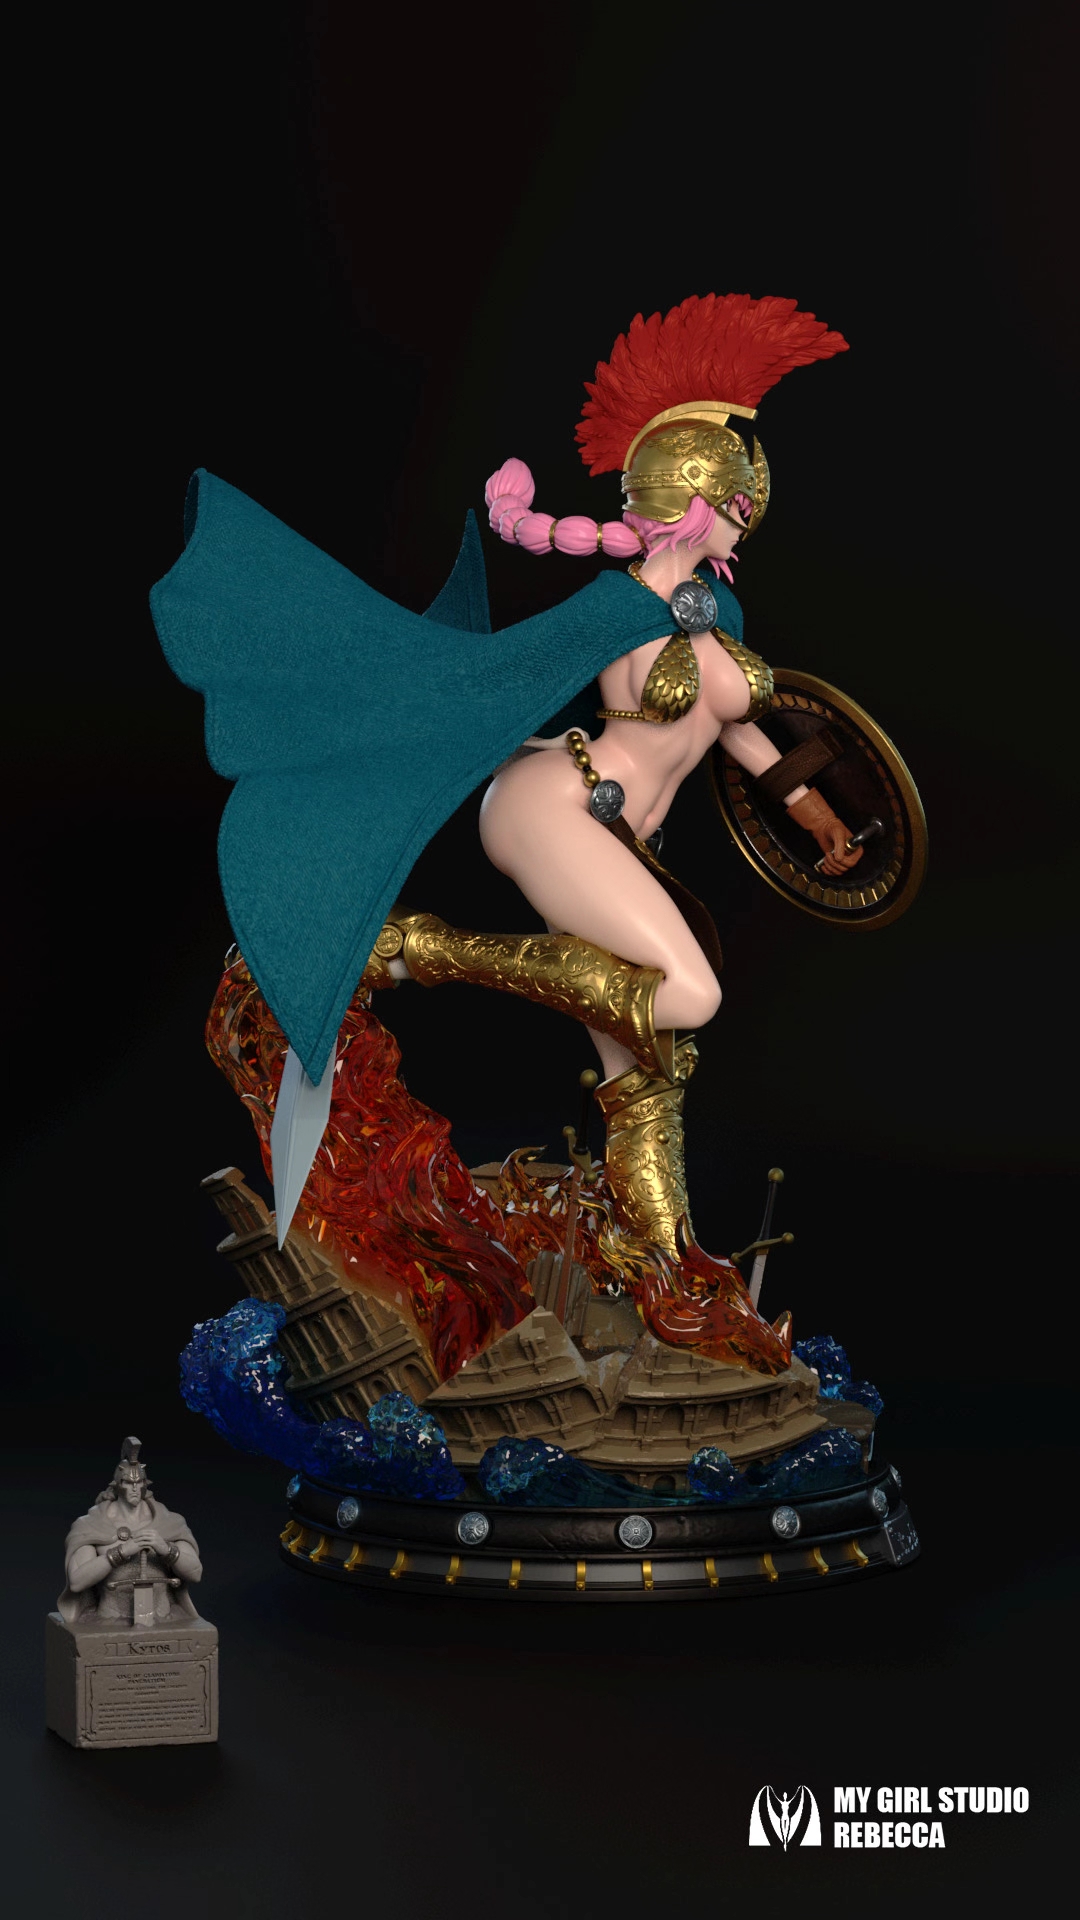 Preorder】My Girl Studio One-Piece Rebecca resin statue's post card